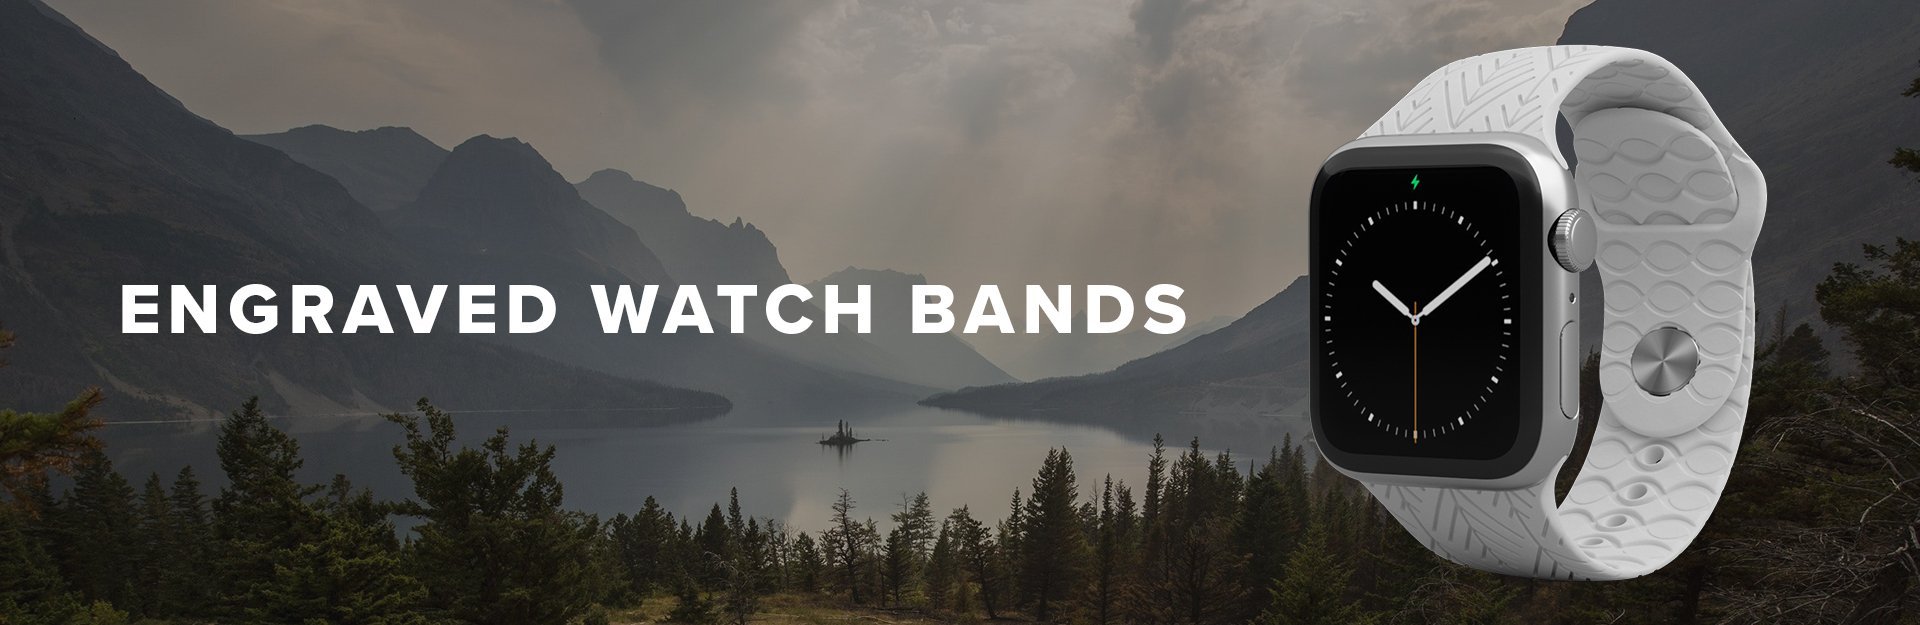 Engraved Watch Bands, solid white watch overlaid on mountain lake